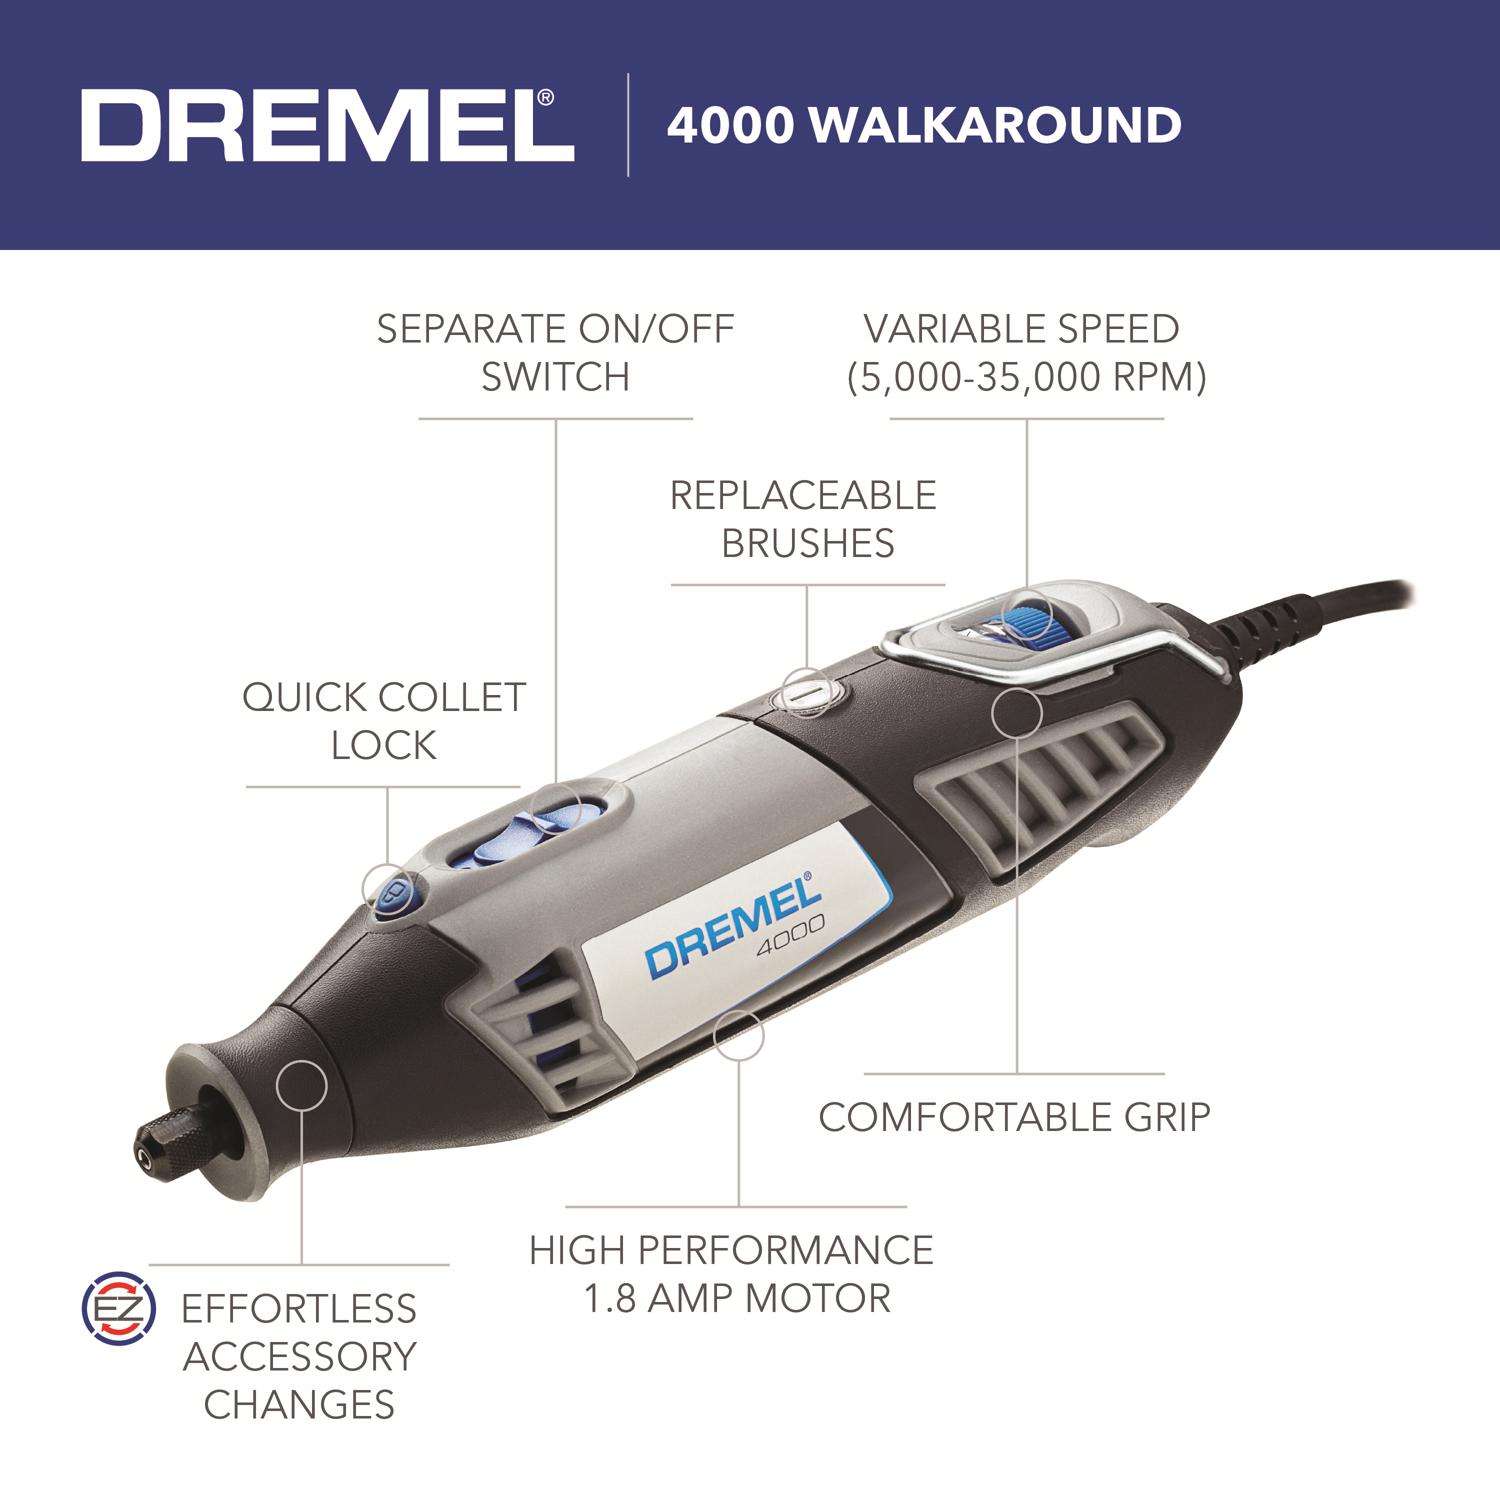 100% Effective Dremel Rotary Tool Workstation - The Owner-Builder